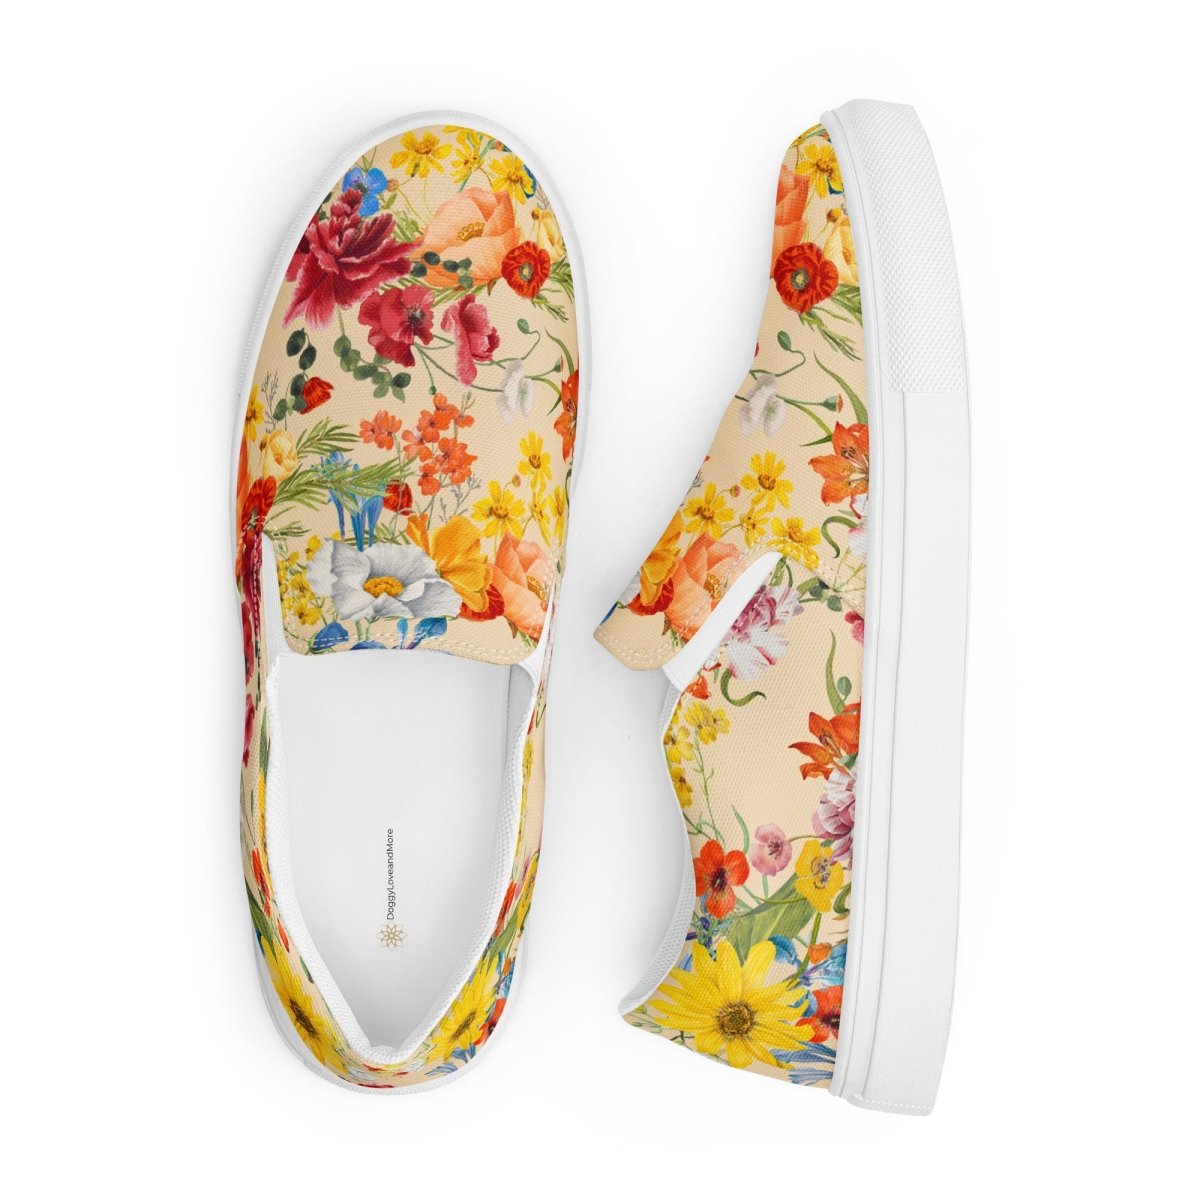 Spring Flowers Women’s Slip-On Shoes - DoggyLoveandMore